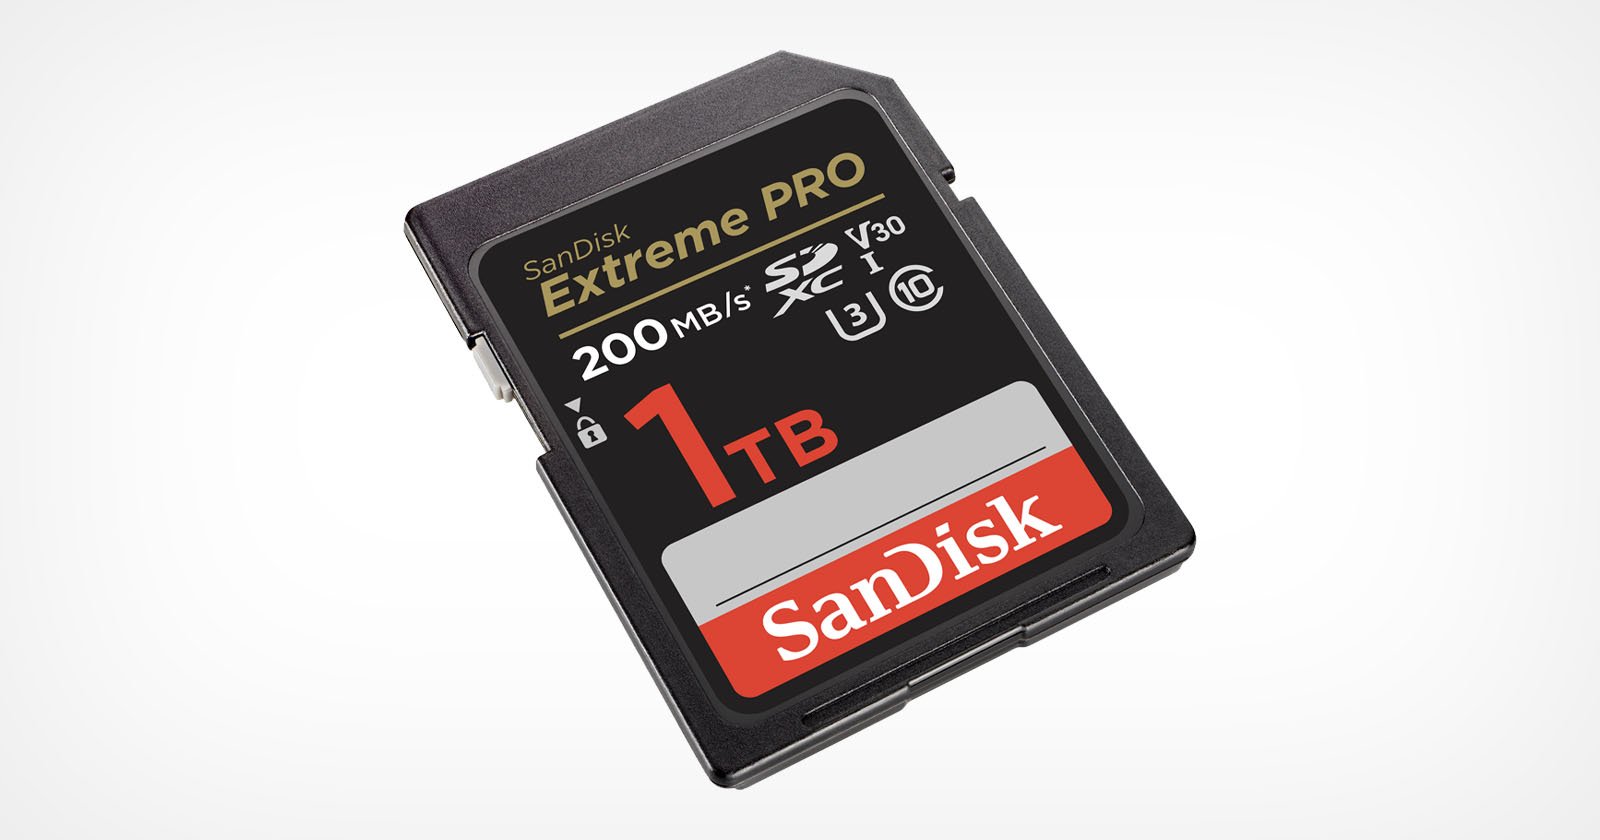 SanDisk has announced new high-capacity SD and microSD cards that seemingly defy the laws of the UHS-I standard. Despite using the UHS-I specification